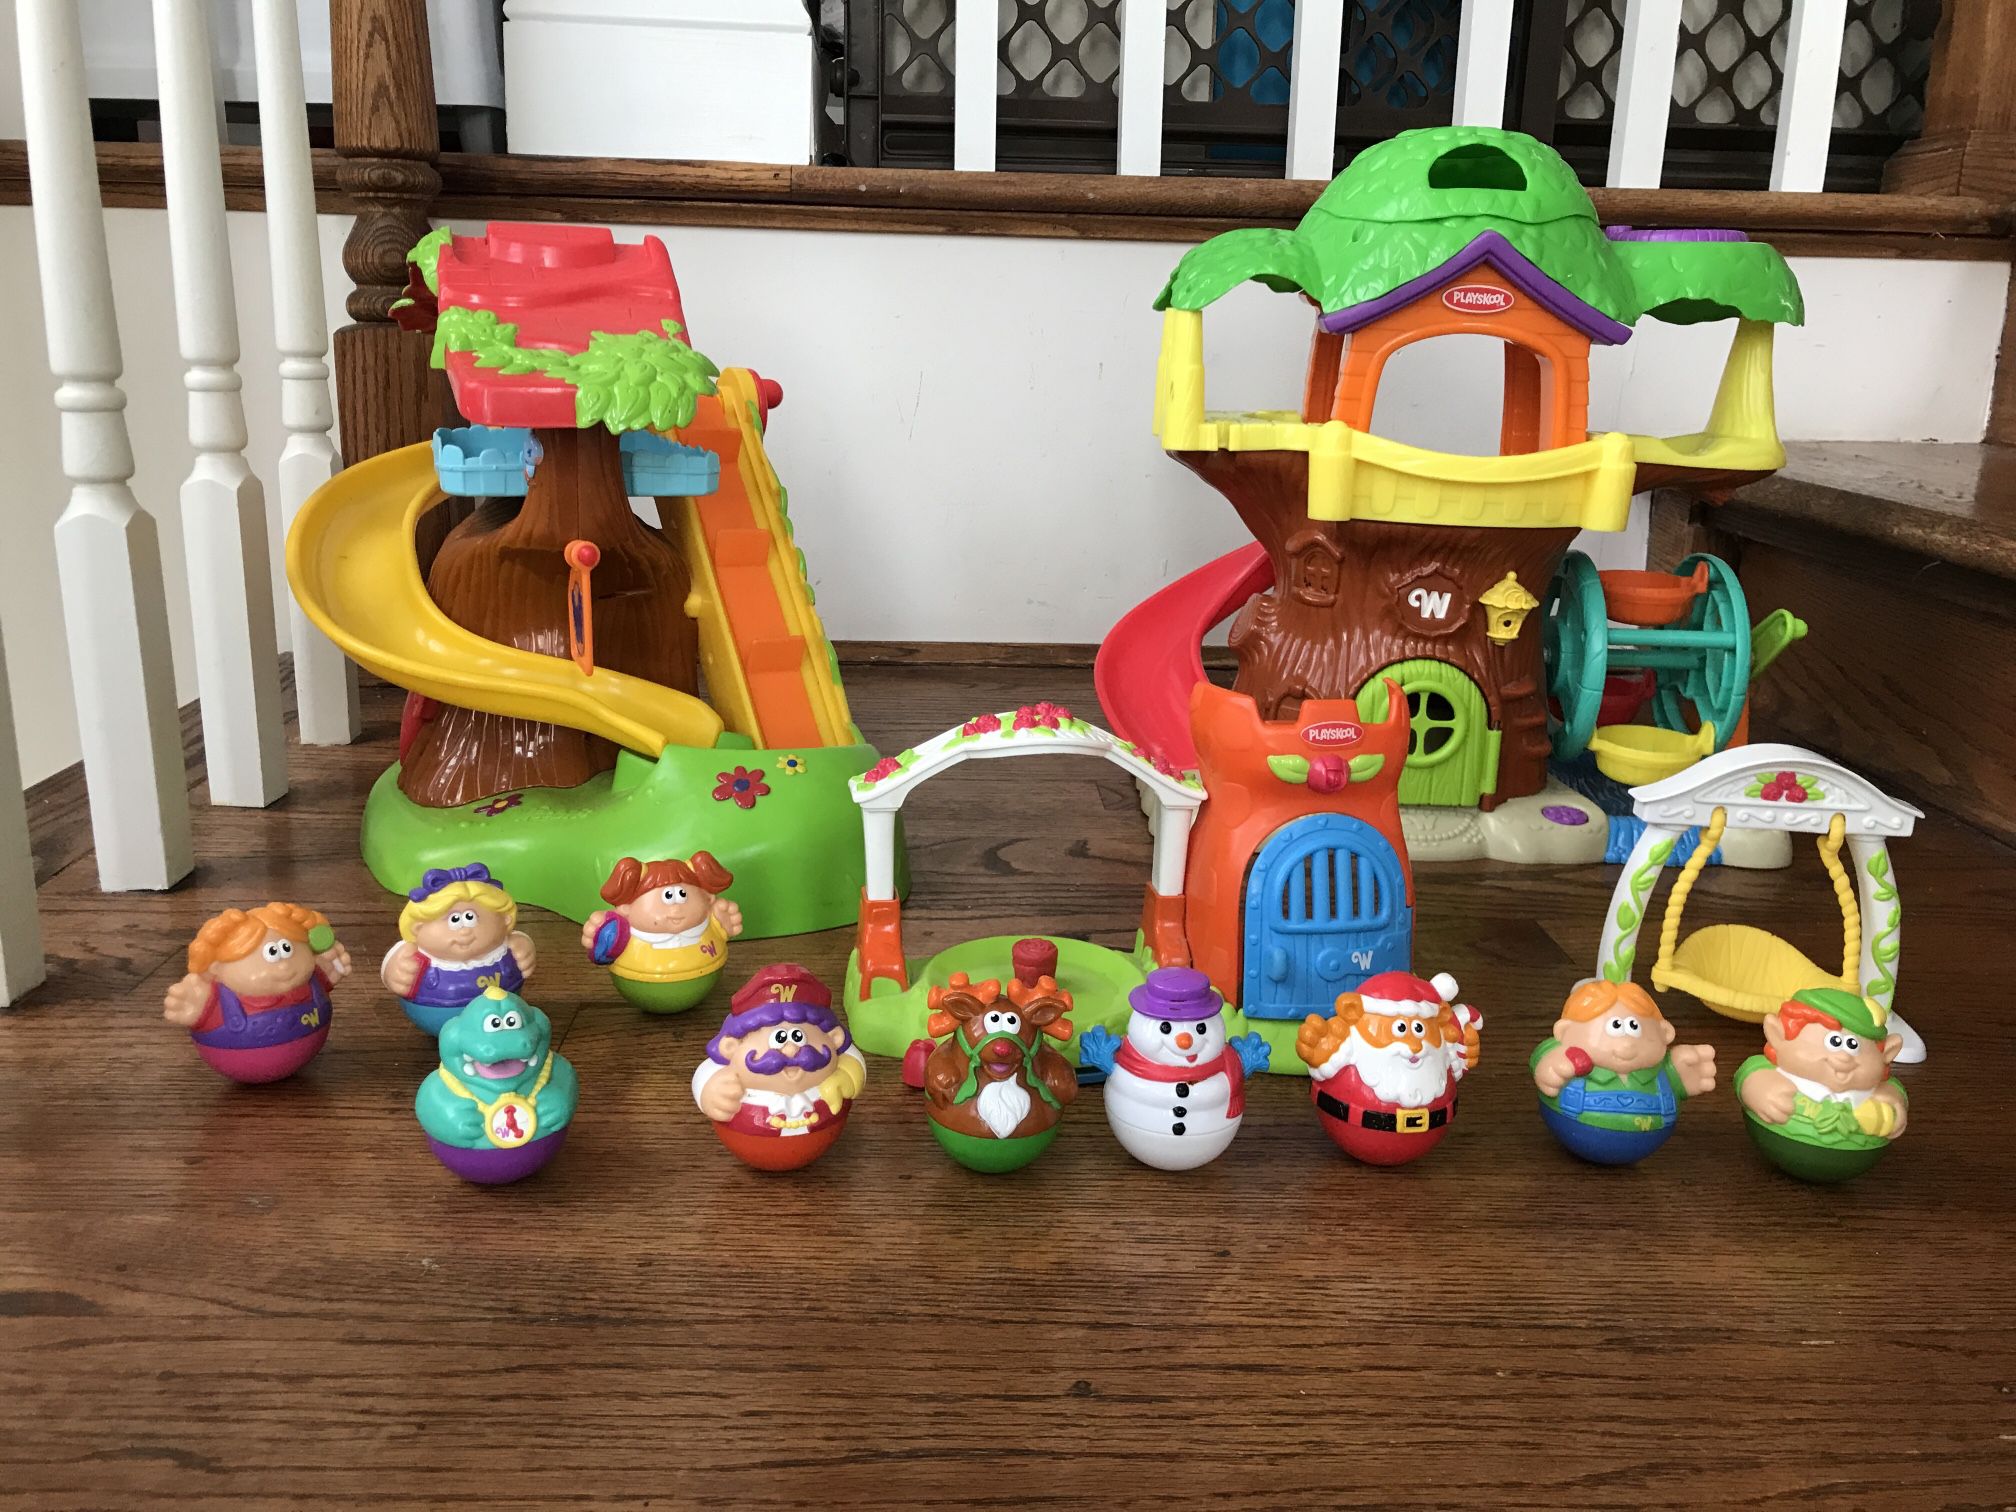 Two Adorable Weebles Sets With 10 Characters ($25 For Both)